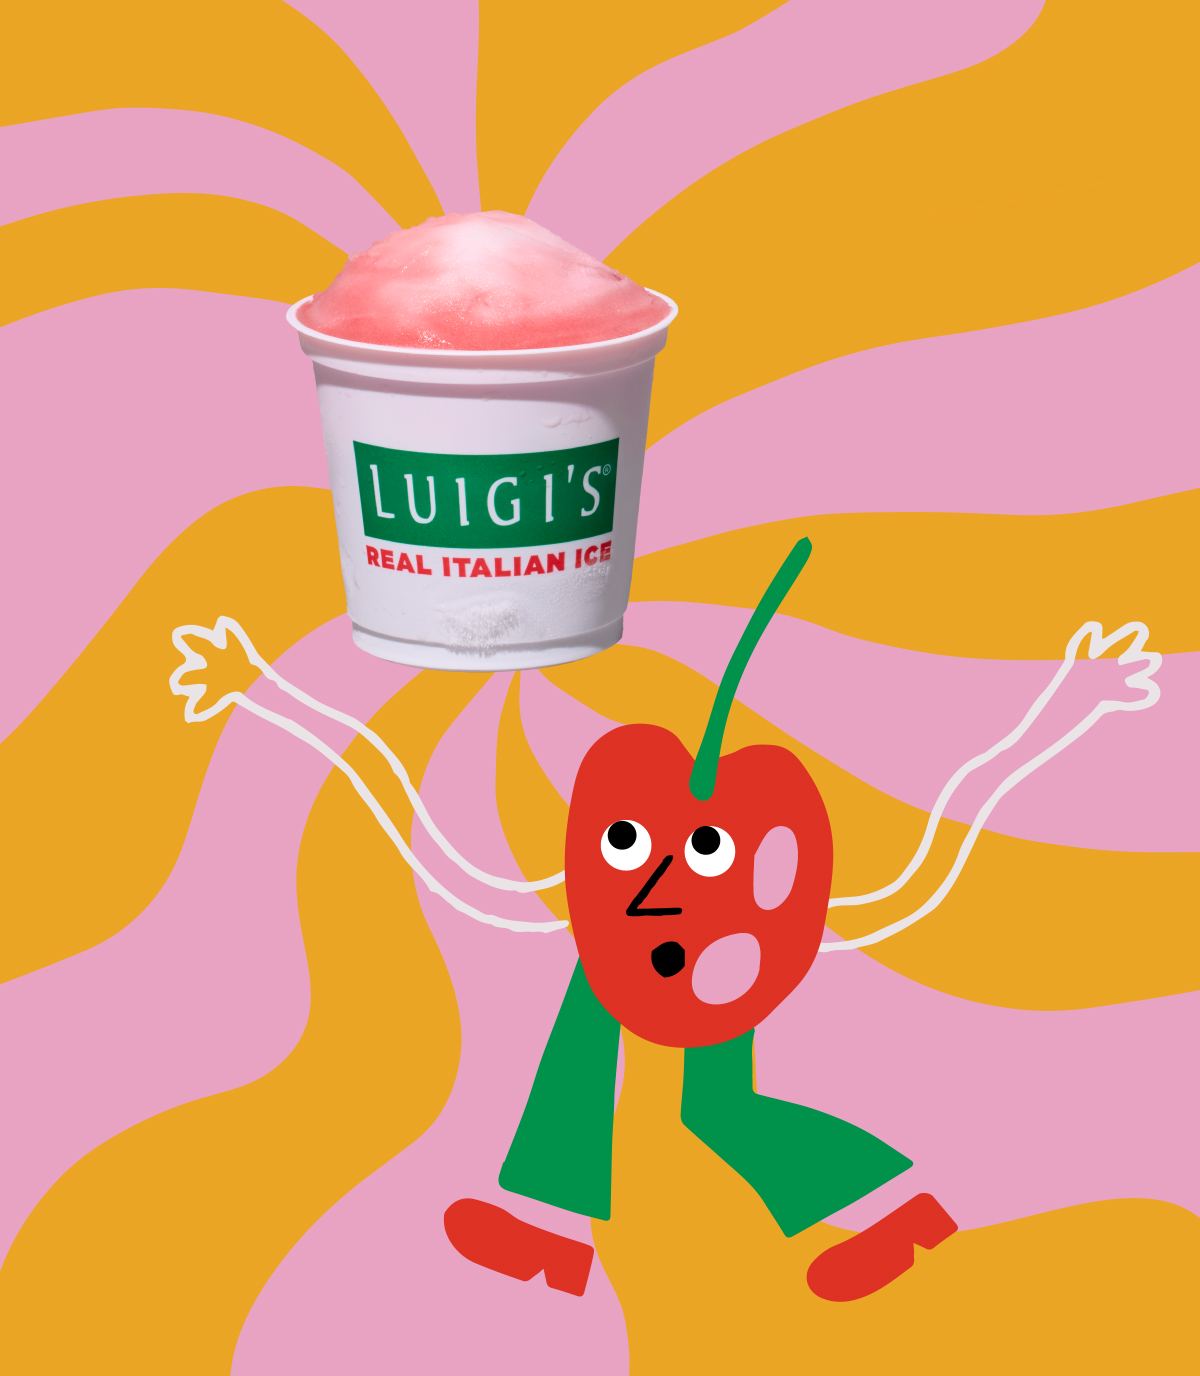 Groovy cherry graphic with cherry lemon swirl LUIGI'S Real Italian Ice. Cool retro, psychedelic background in pink and yellow. Cherry graphic is looking up at the cup of Italian ice with a surprised face. The cherry character is wearing green pants, and red shoes.